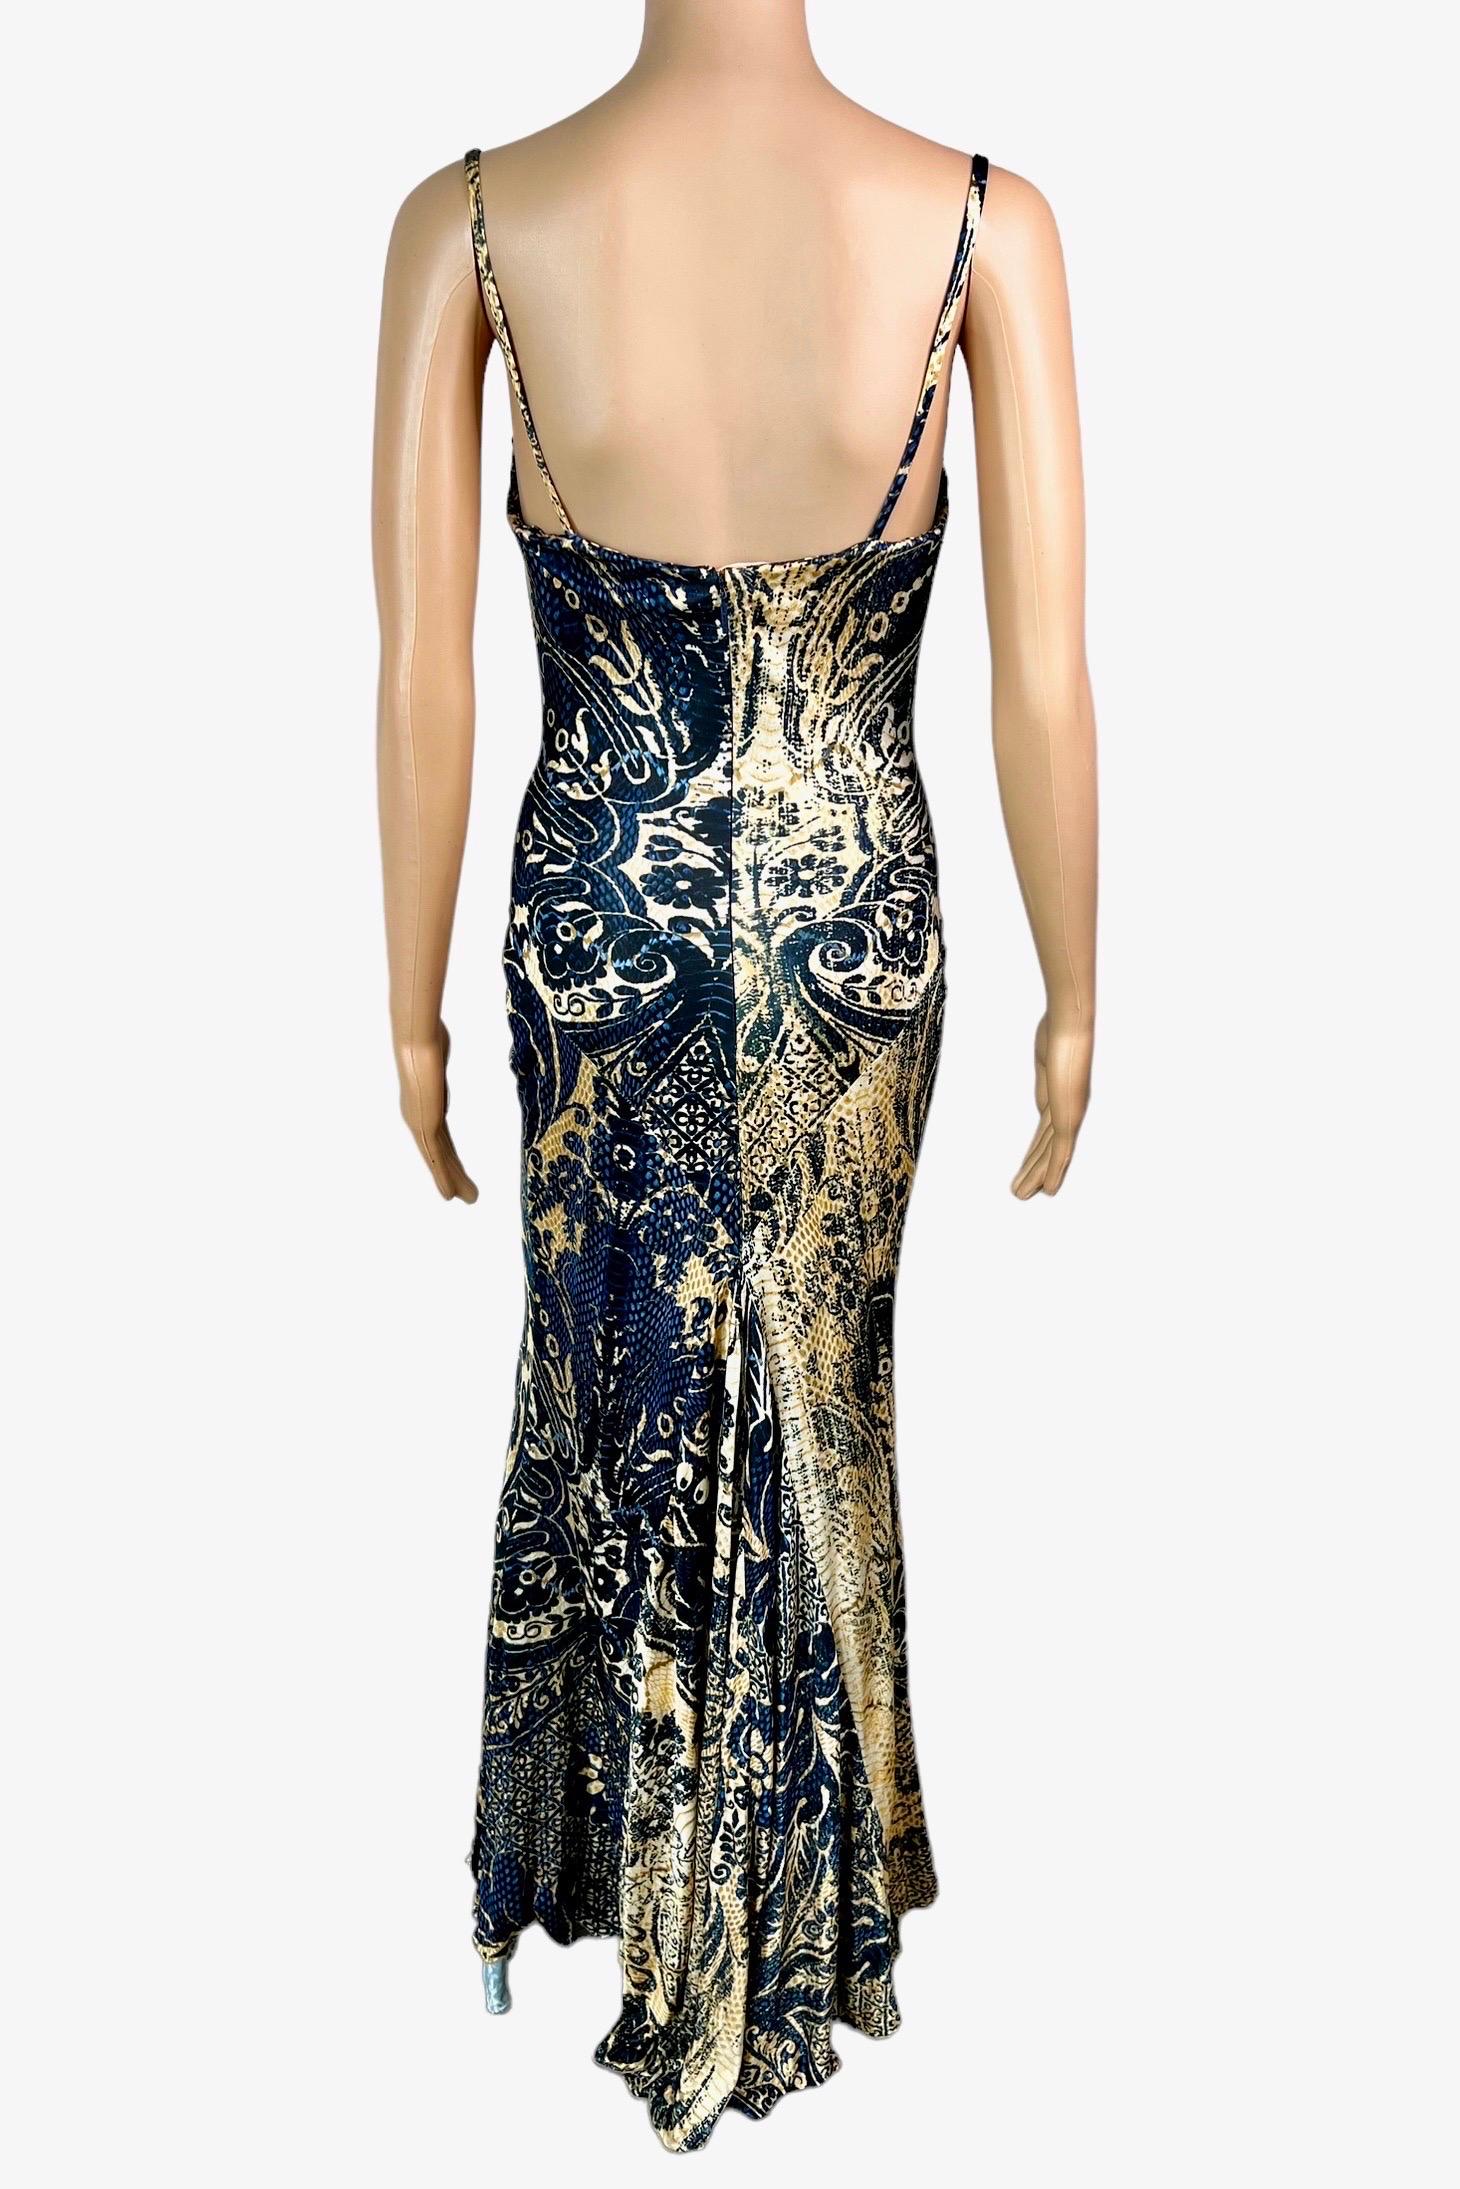 Roberto Cavalli c.2005 Bustier Bra Abstract Print Maxi Evening Dress Gown For Sale 3